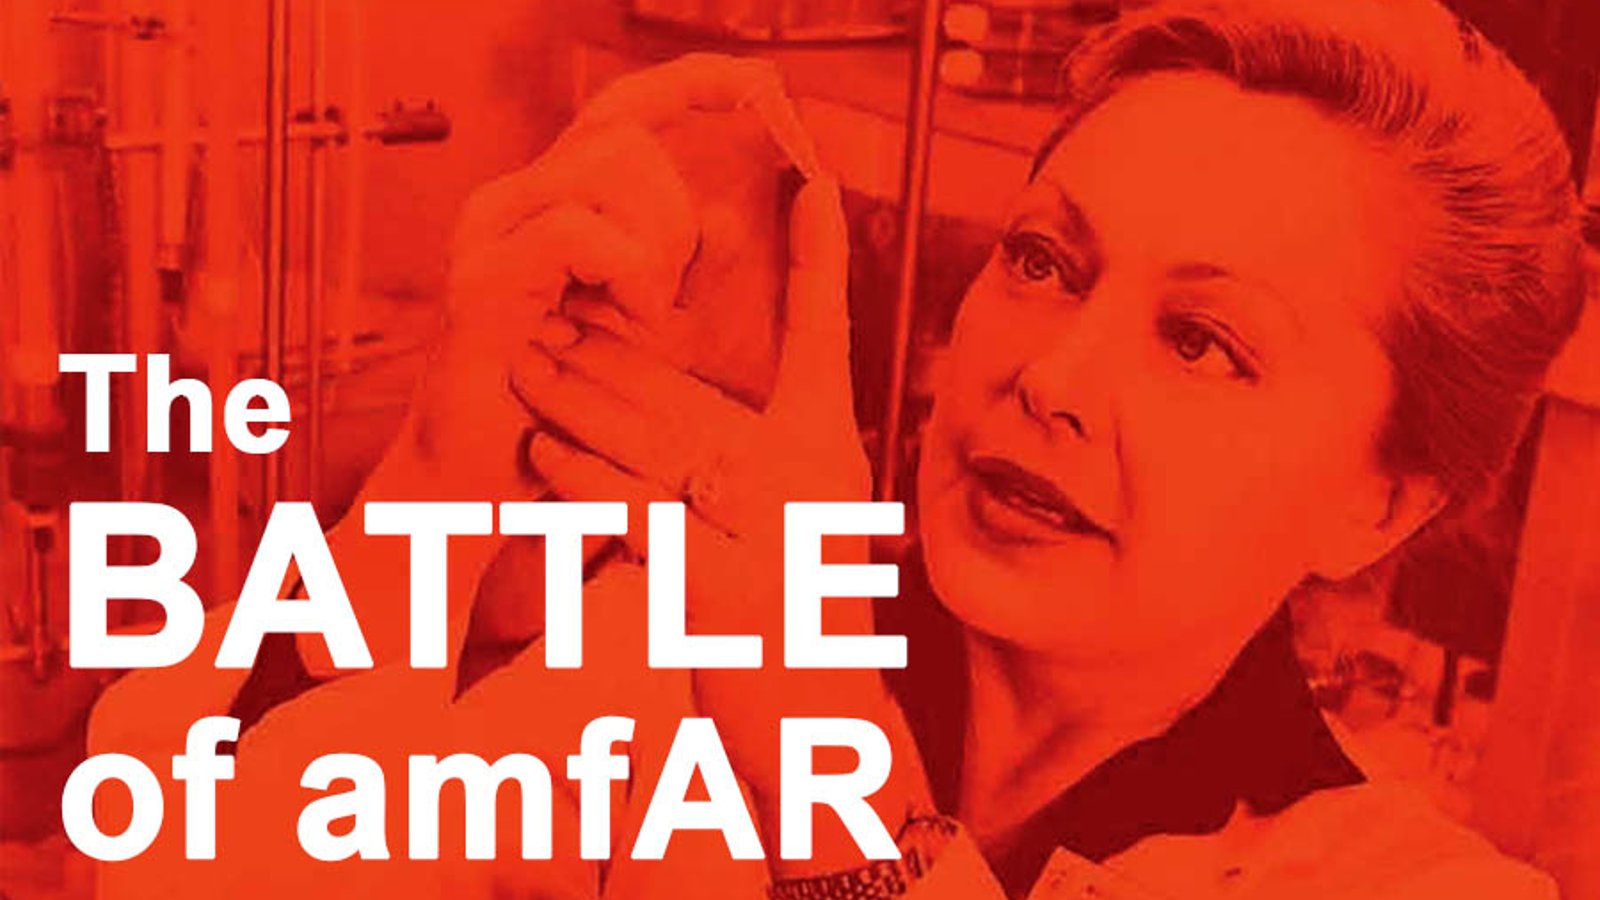 The Battle of amfAR: The Quest for an AIDS Cure 